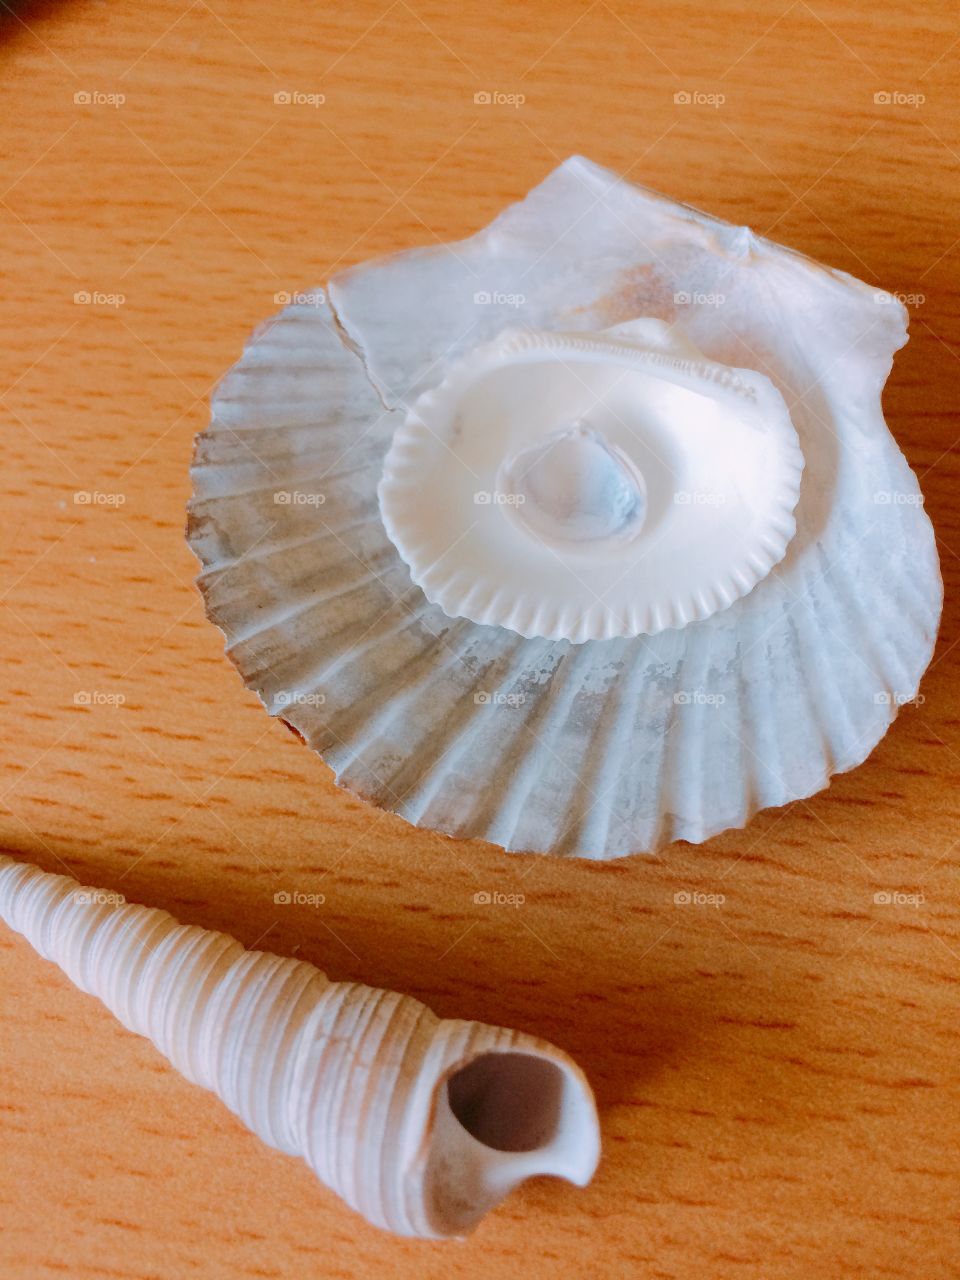 Shells to inspire 